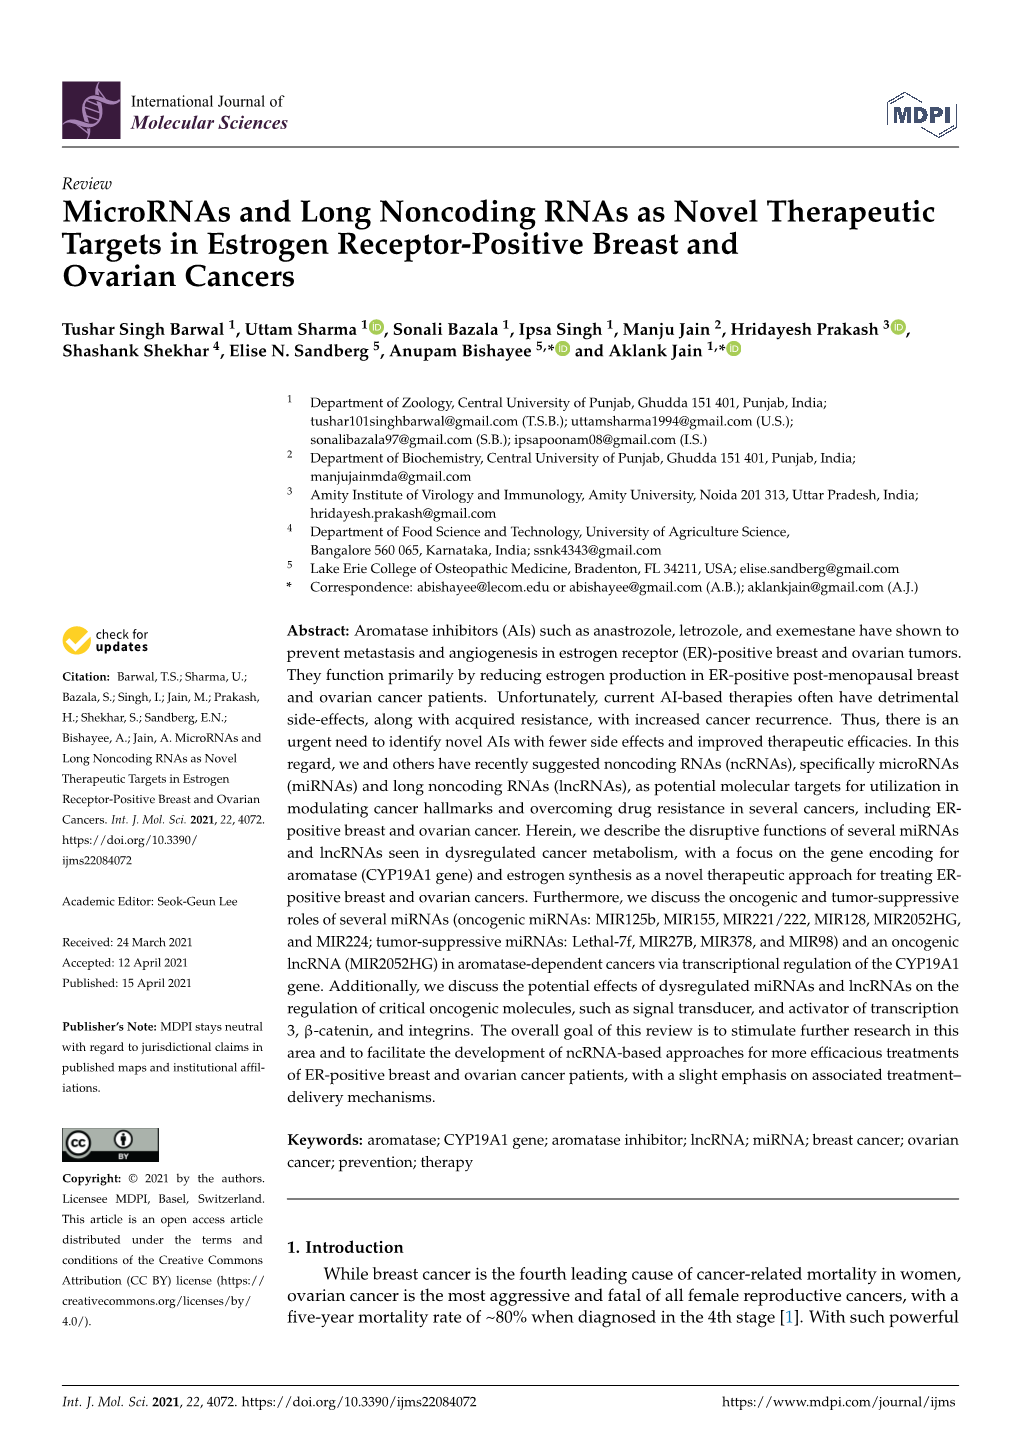 Micrornas and Long Noncoding Rnas As Novel Therapeutic Targets in Estrogen Receptor-Positive Breast and Ovarian Cancers